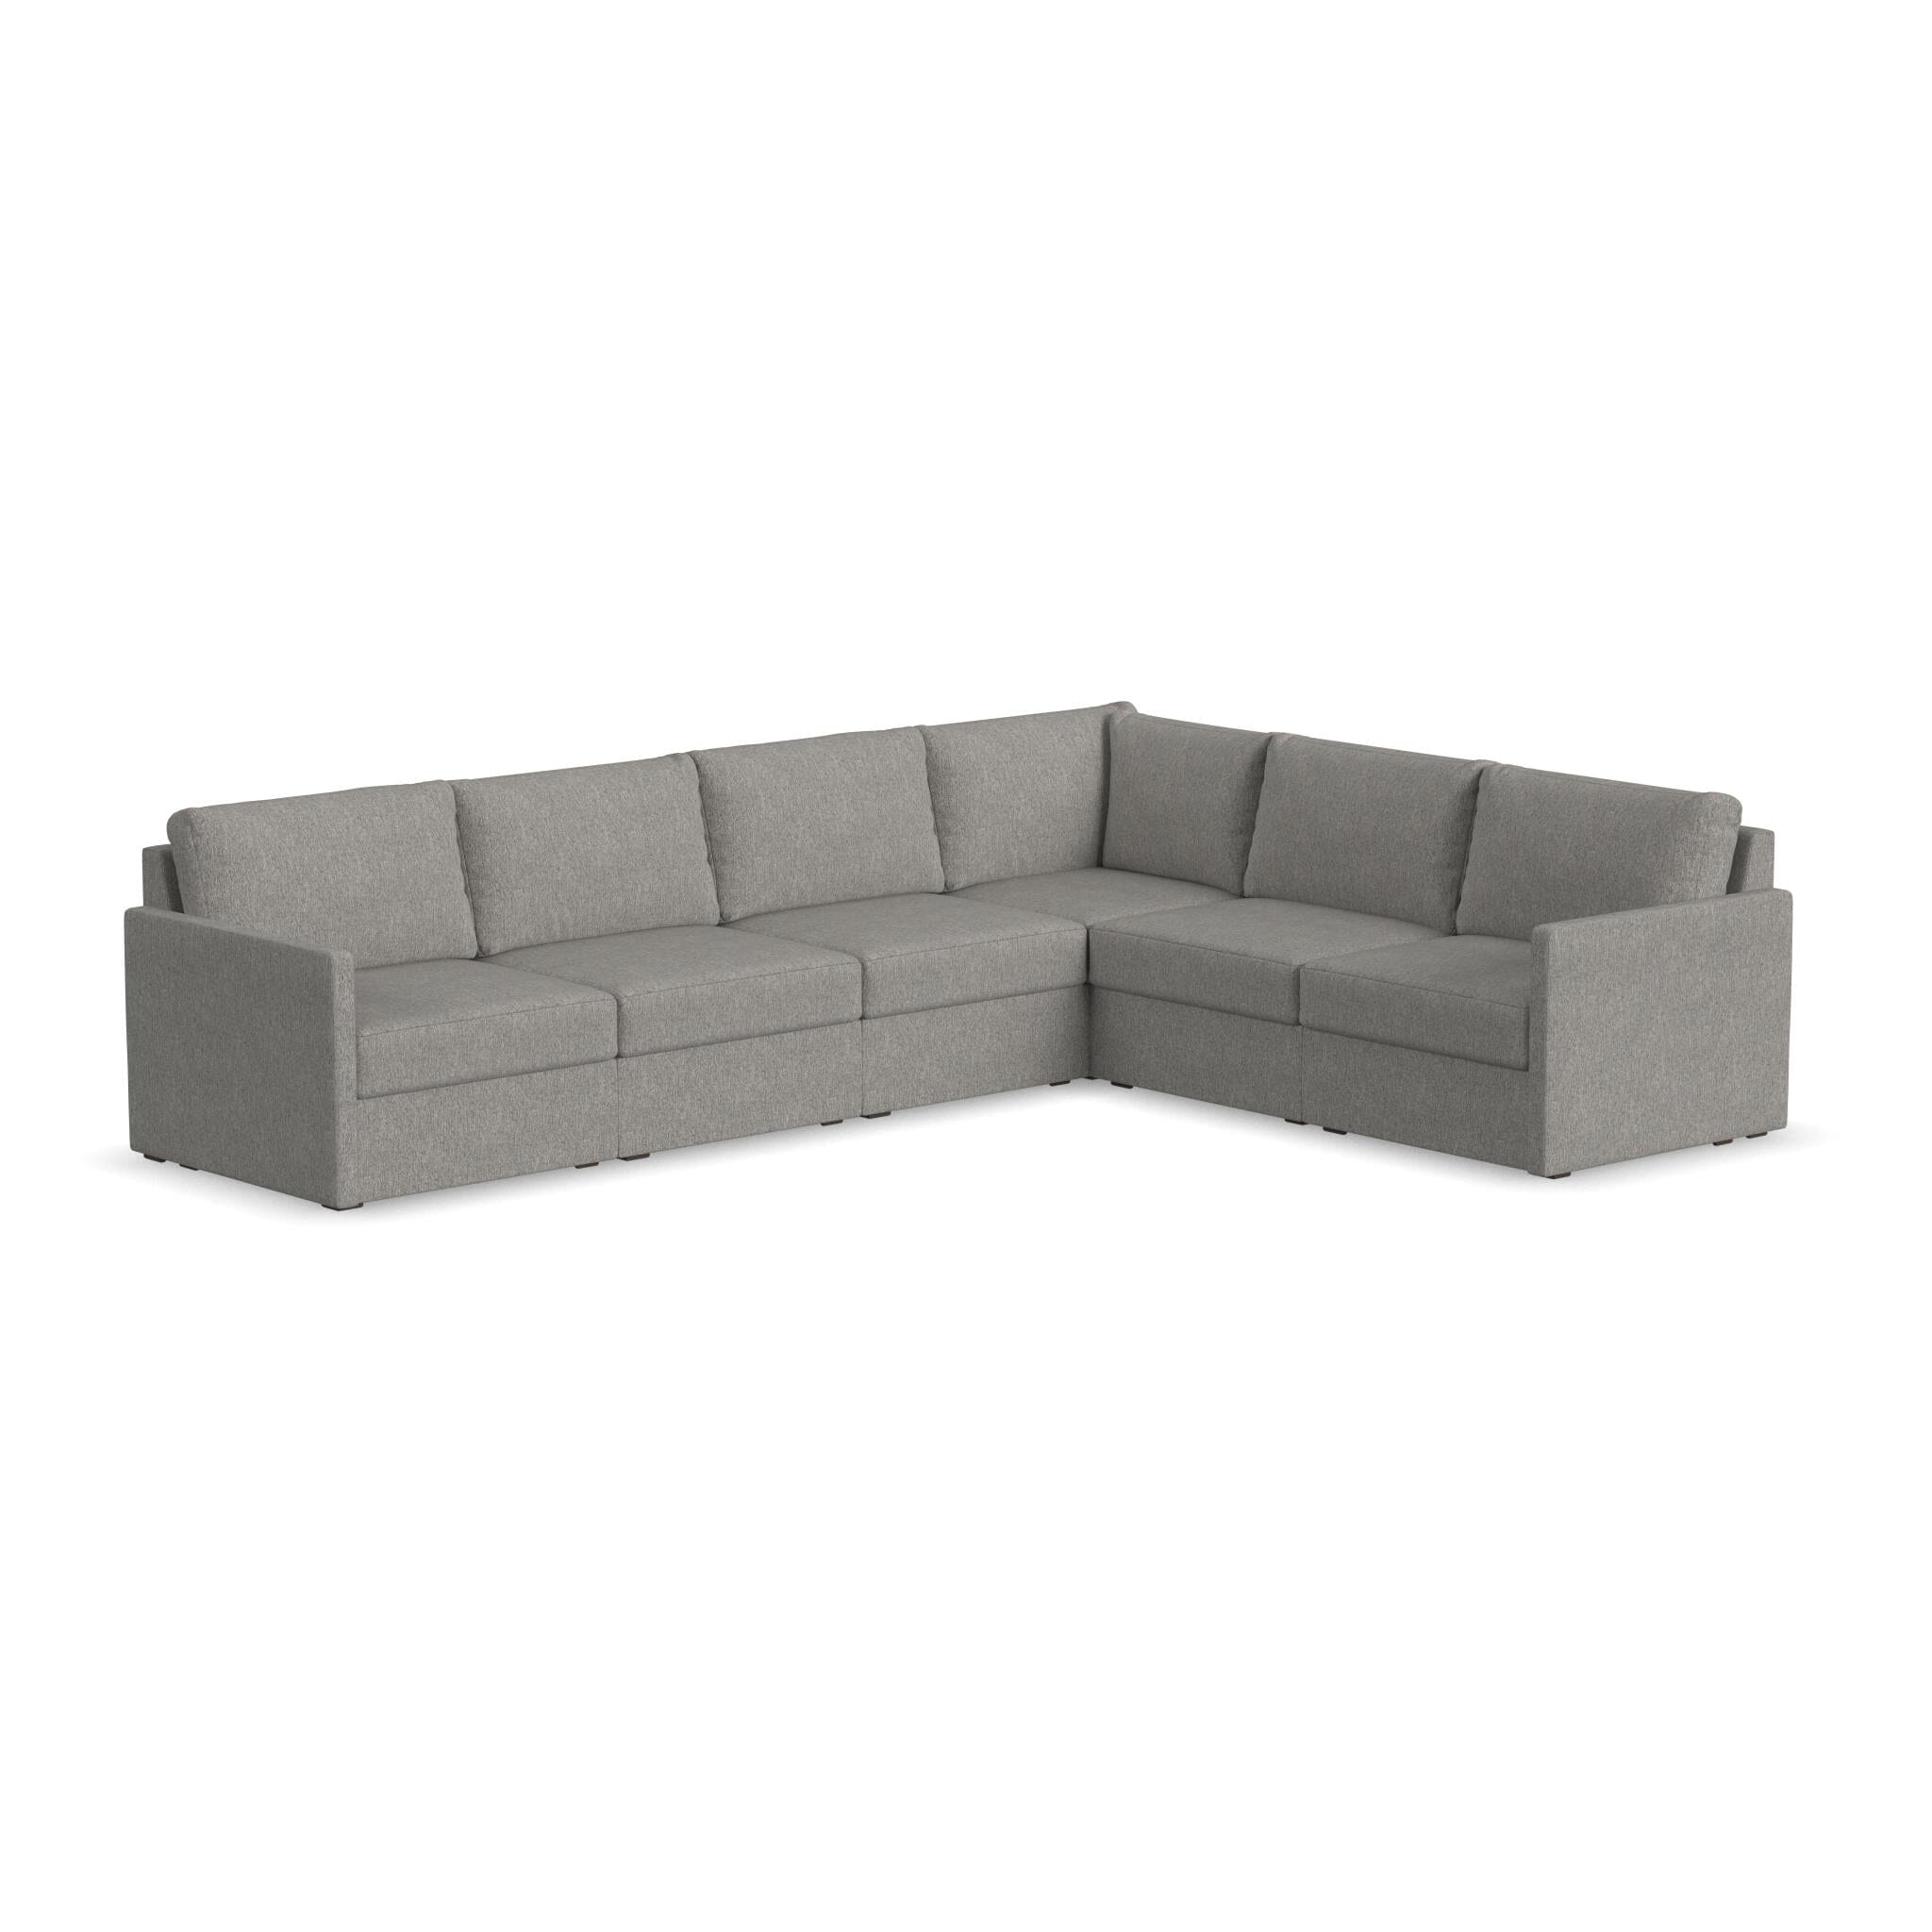 Traditional 6-Seat Sectional with Narrow Arm By Flex Sectional Flex